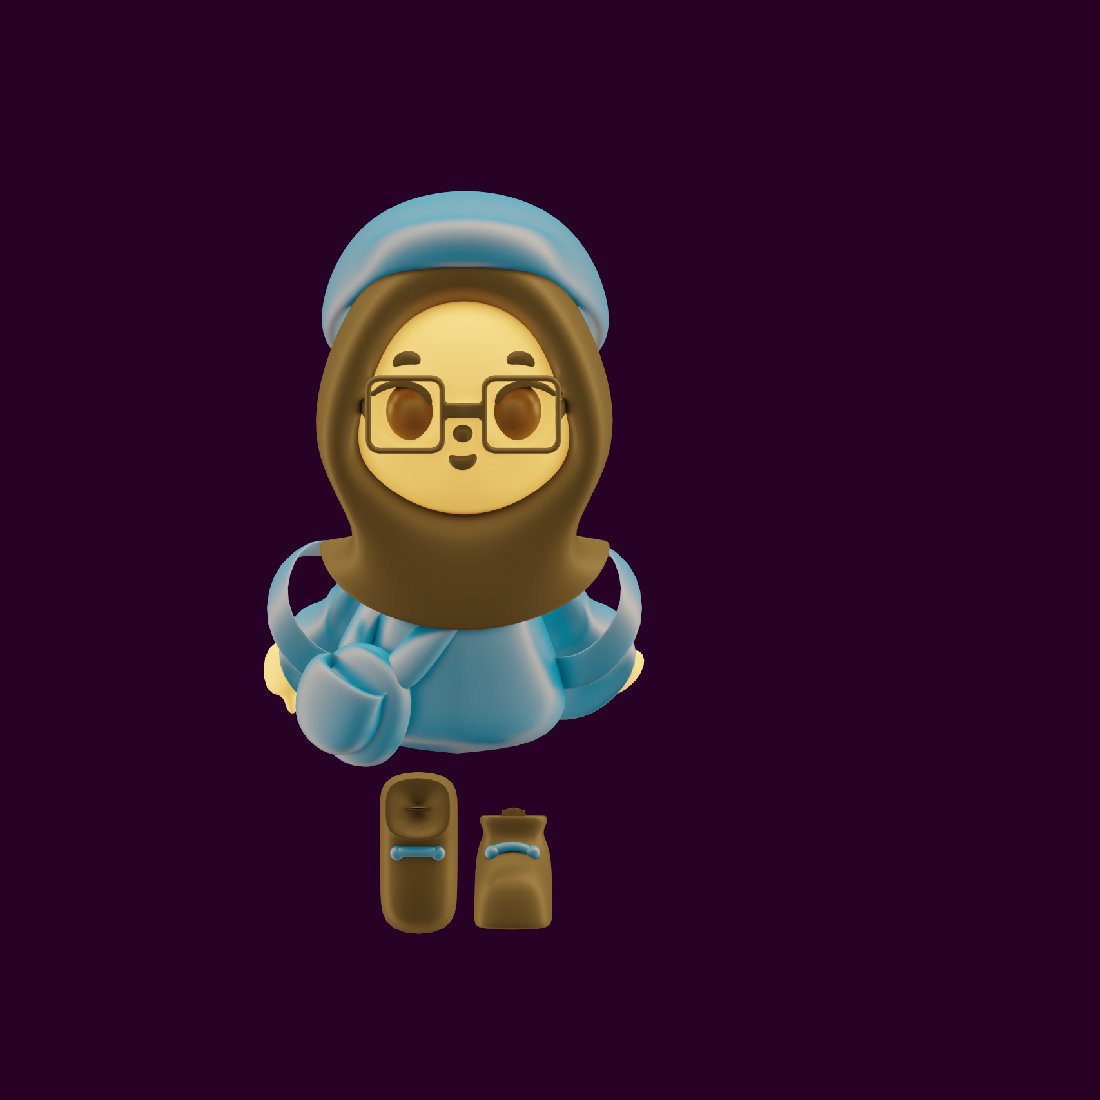 3d chibi caracter render lowpoly for your artwork preview image.